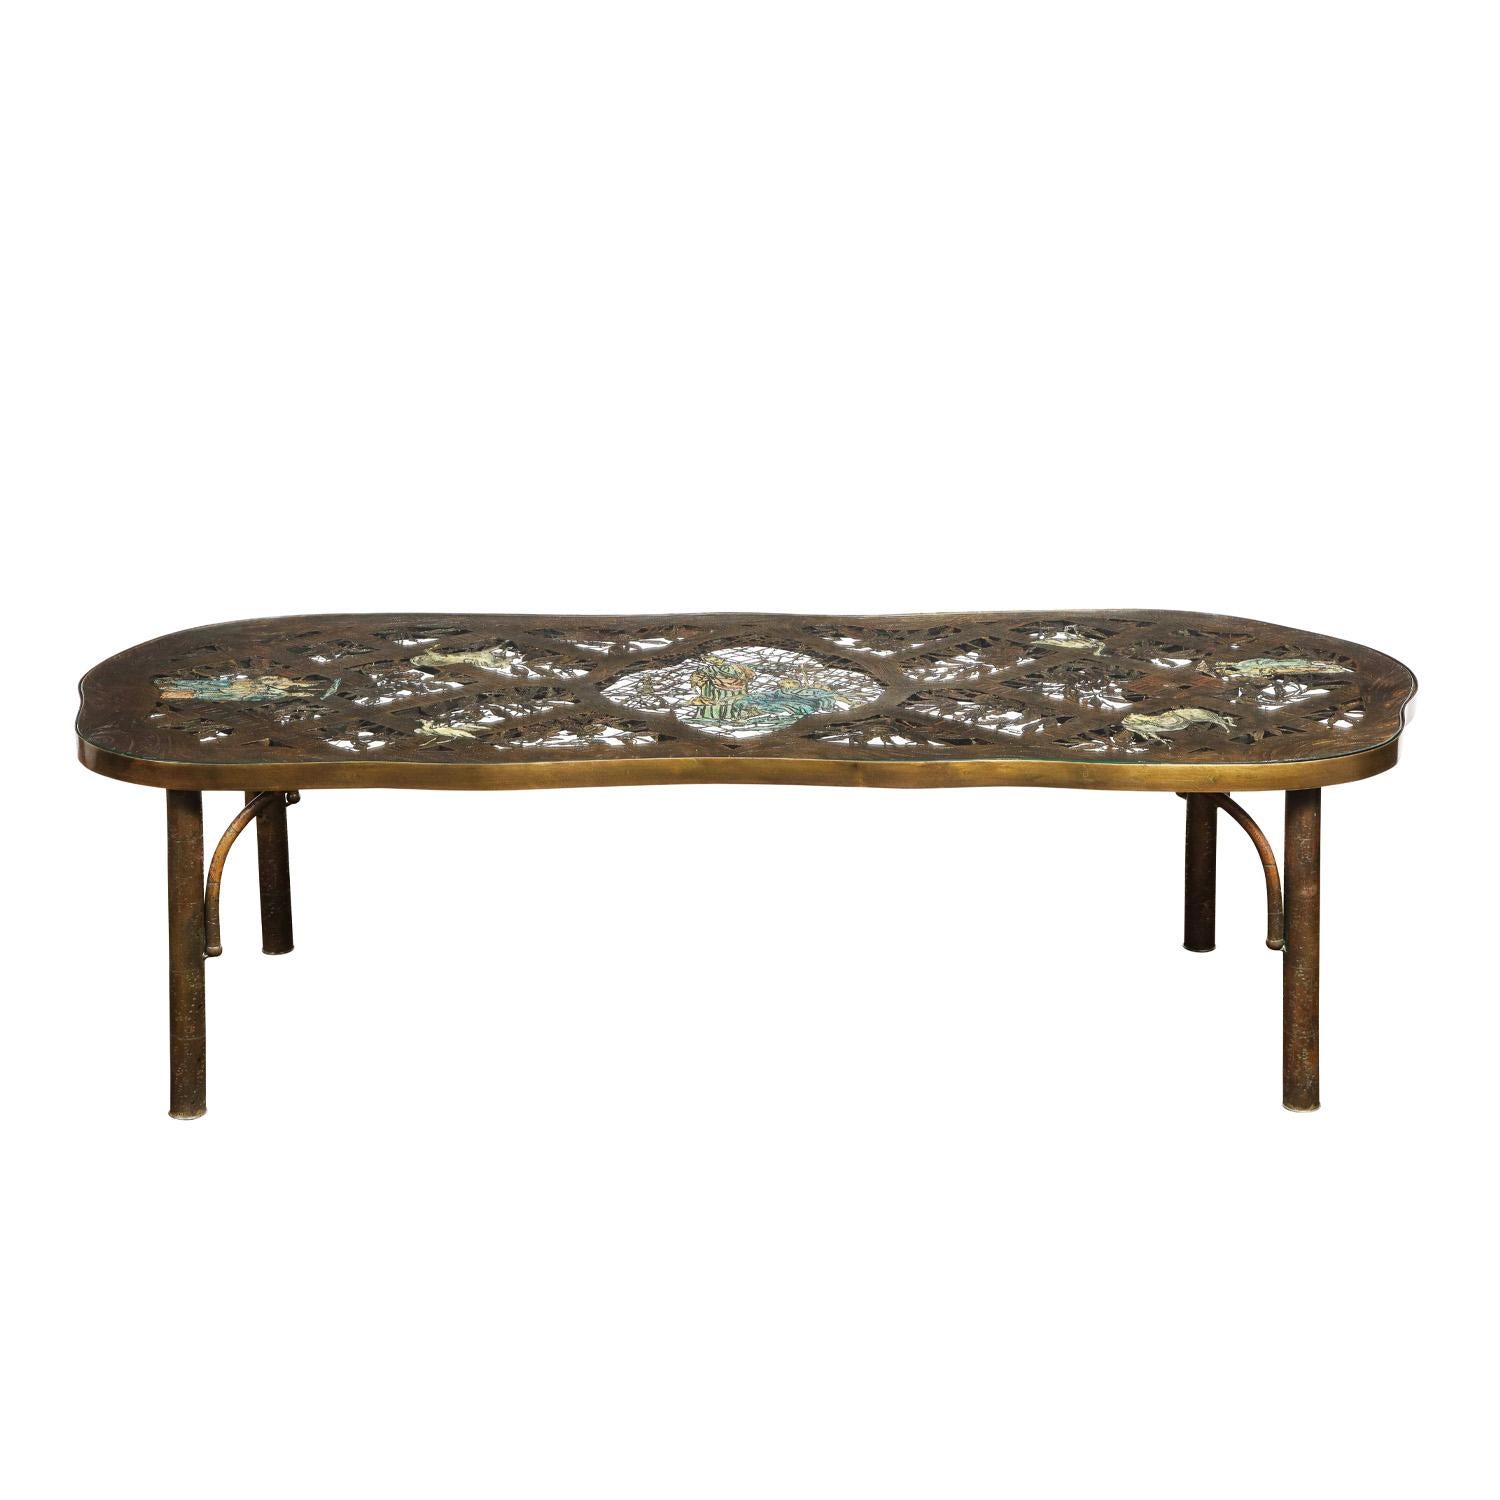 Exceptional and rare “Fragonard Pierced” Coffee Table in patinated and pierced bronze and pewter, intricately cut with enamel cloisonne and gold and copper leaf with an inset glass top, by Philip and Kelvin Laverne, American 1960’s (signed “Philip